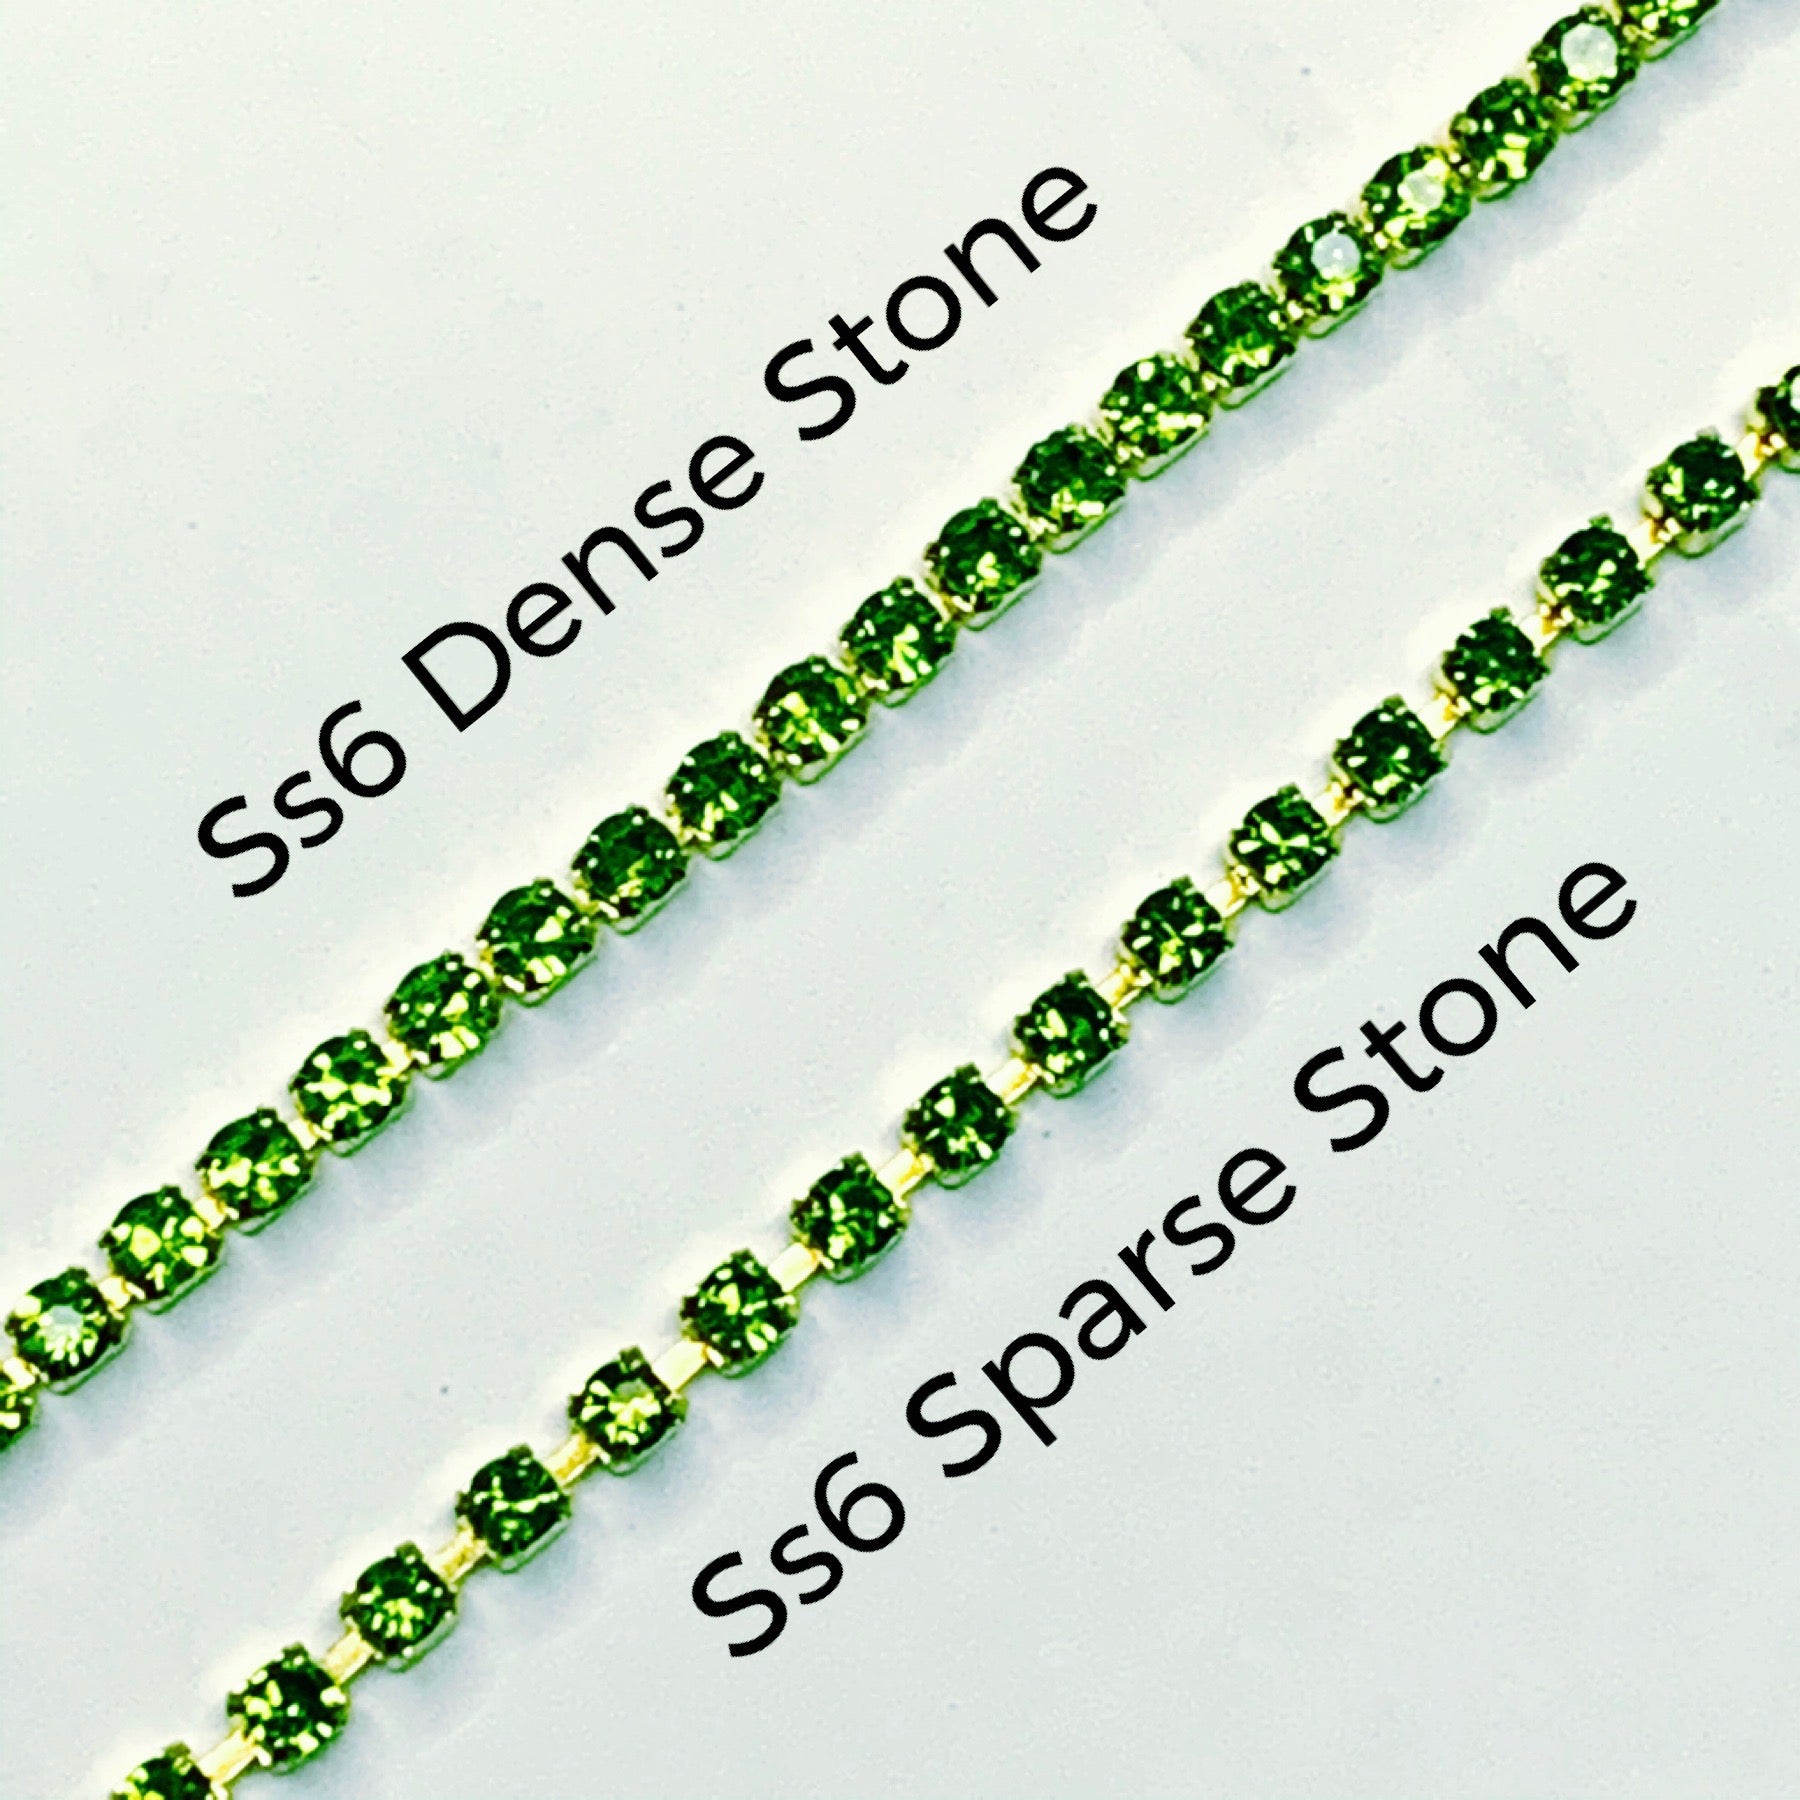 What is the difference between Sparse and Dense Rhinestone Chain